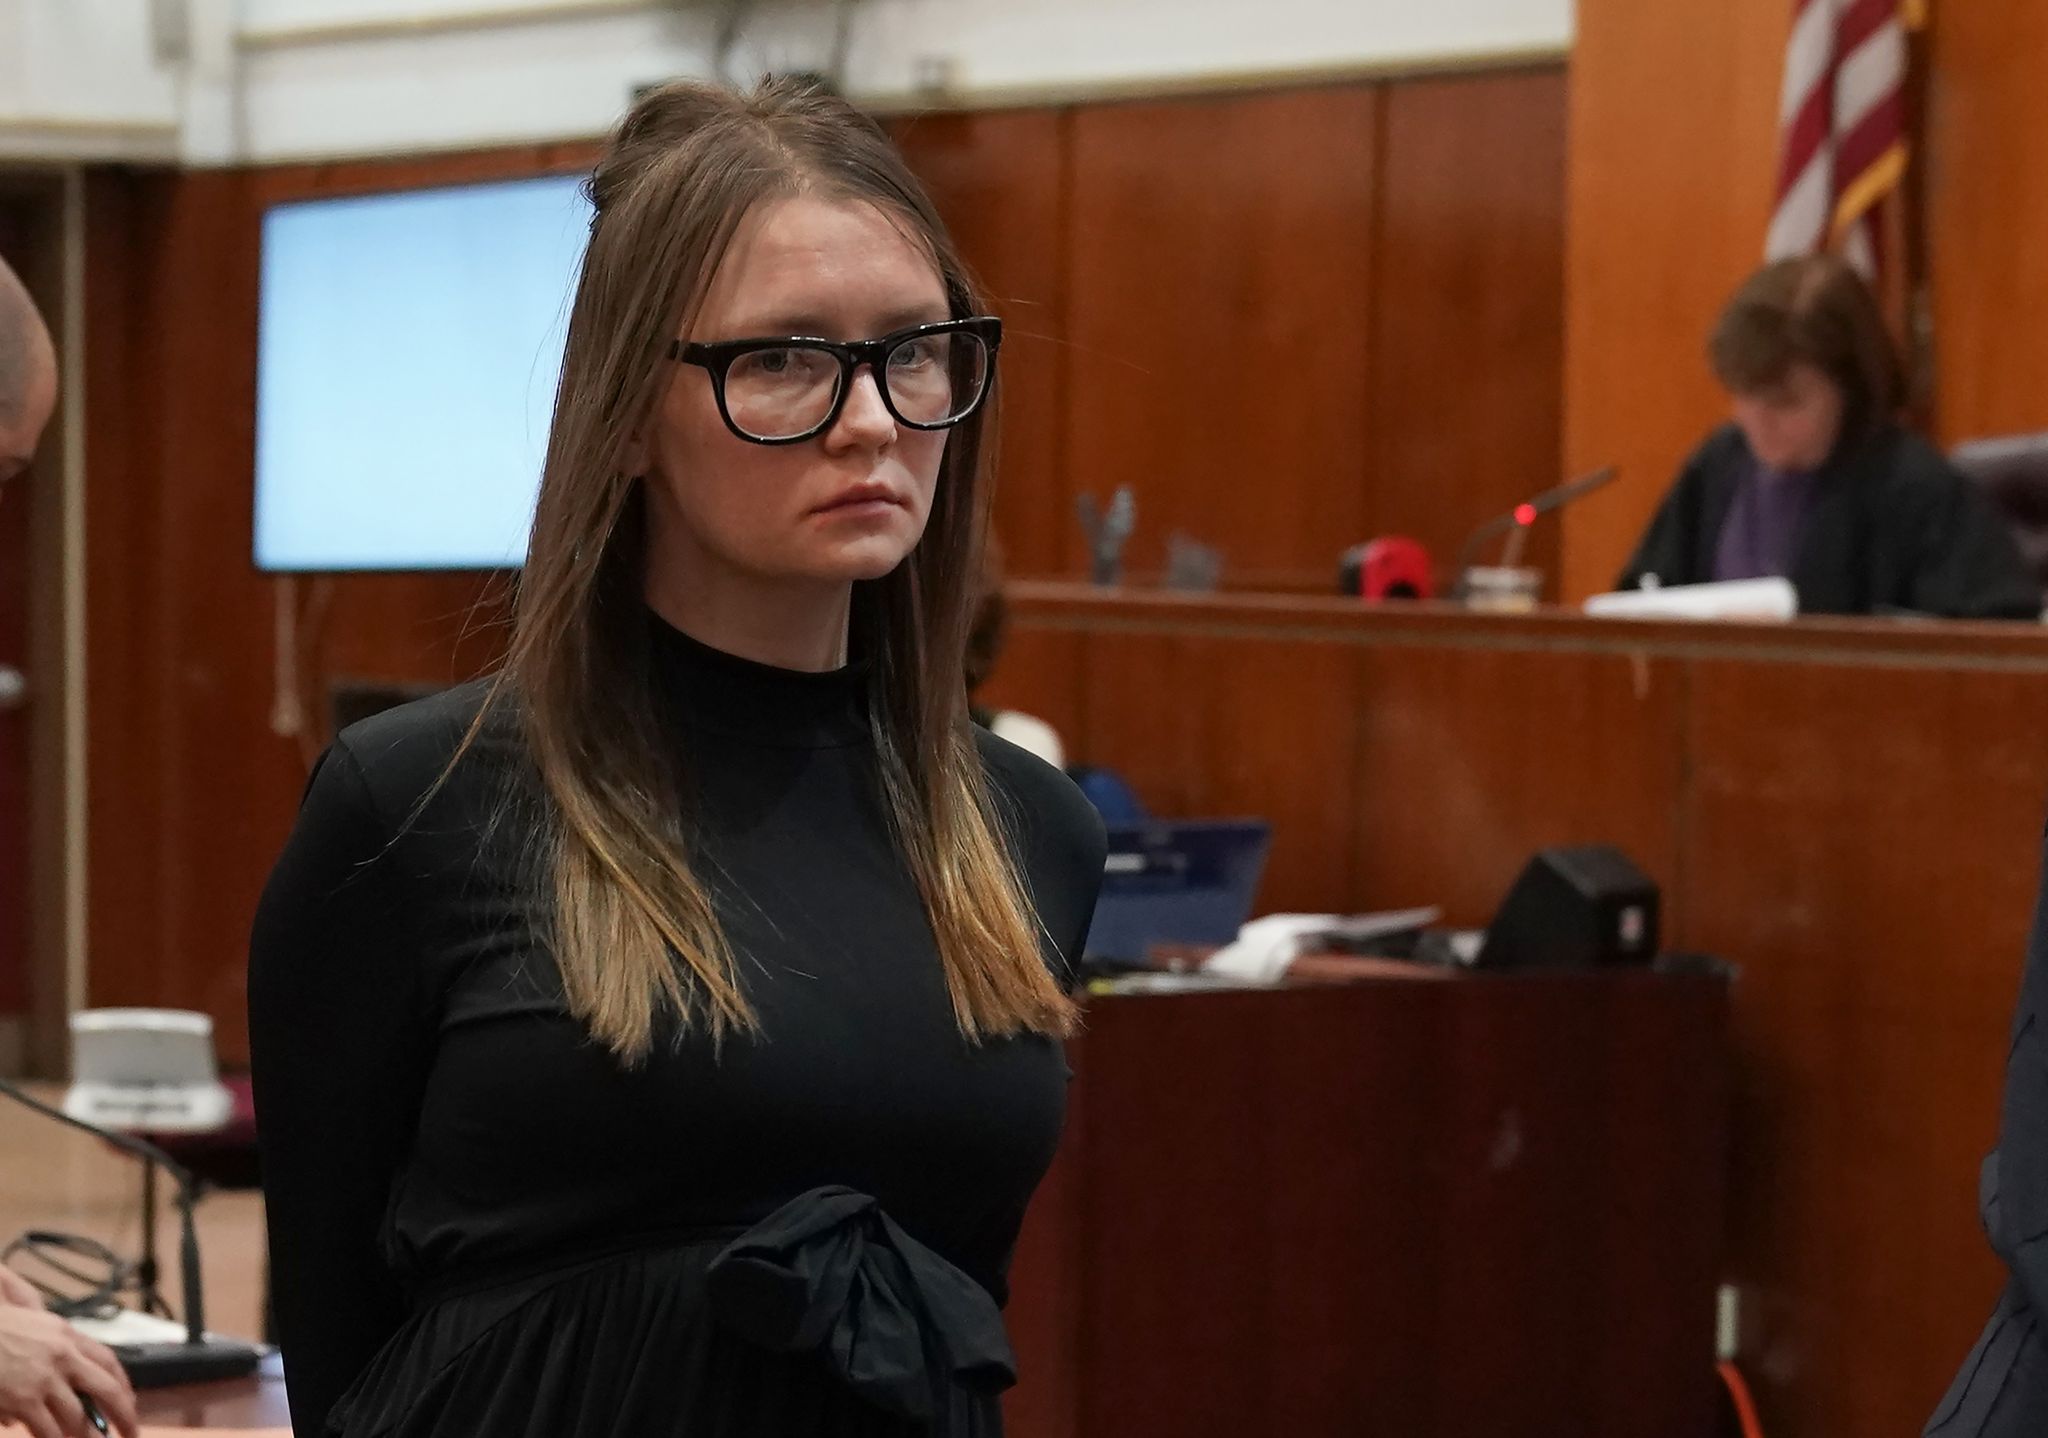 anna delvey born anna sorokin is led away after being sentenced in manhattan supreme court on may 9 2019 following her conviction on multiple counts of grand larceny and theft of services